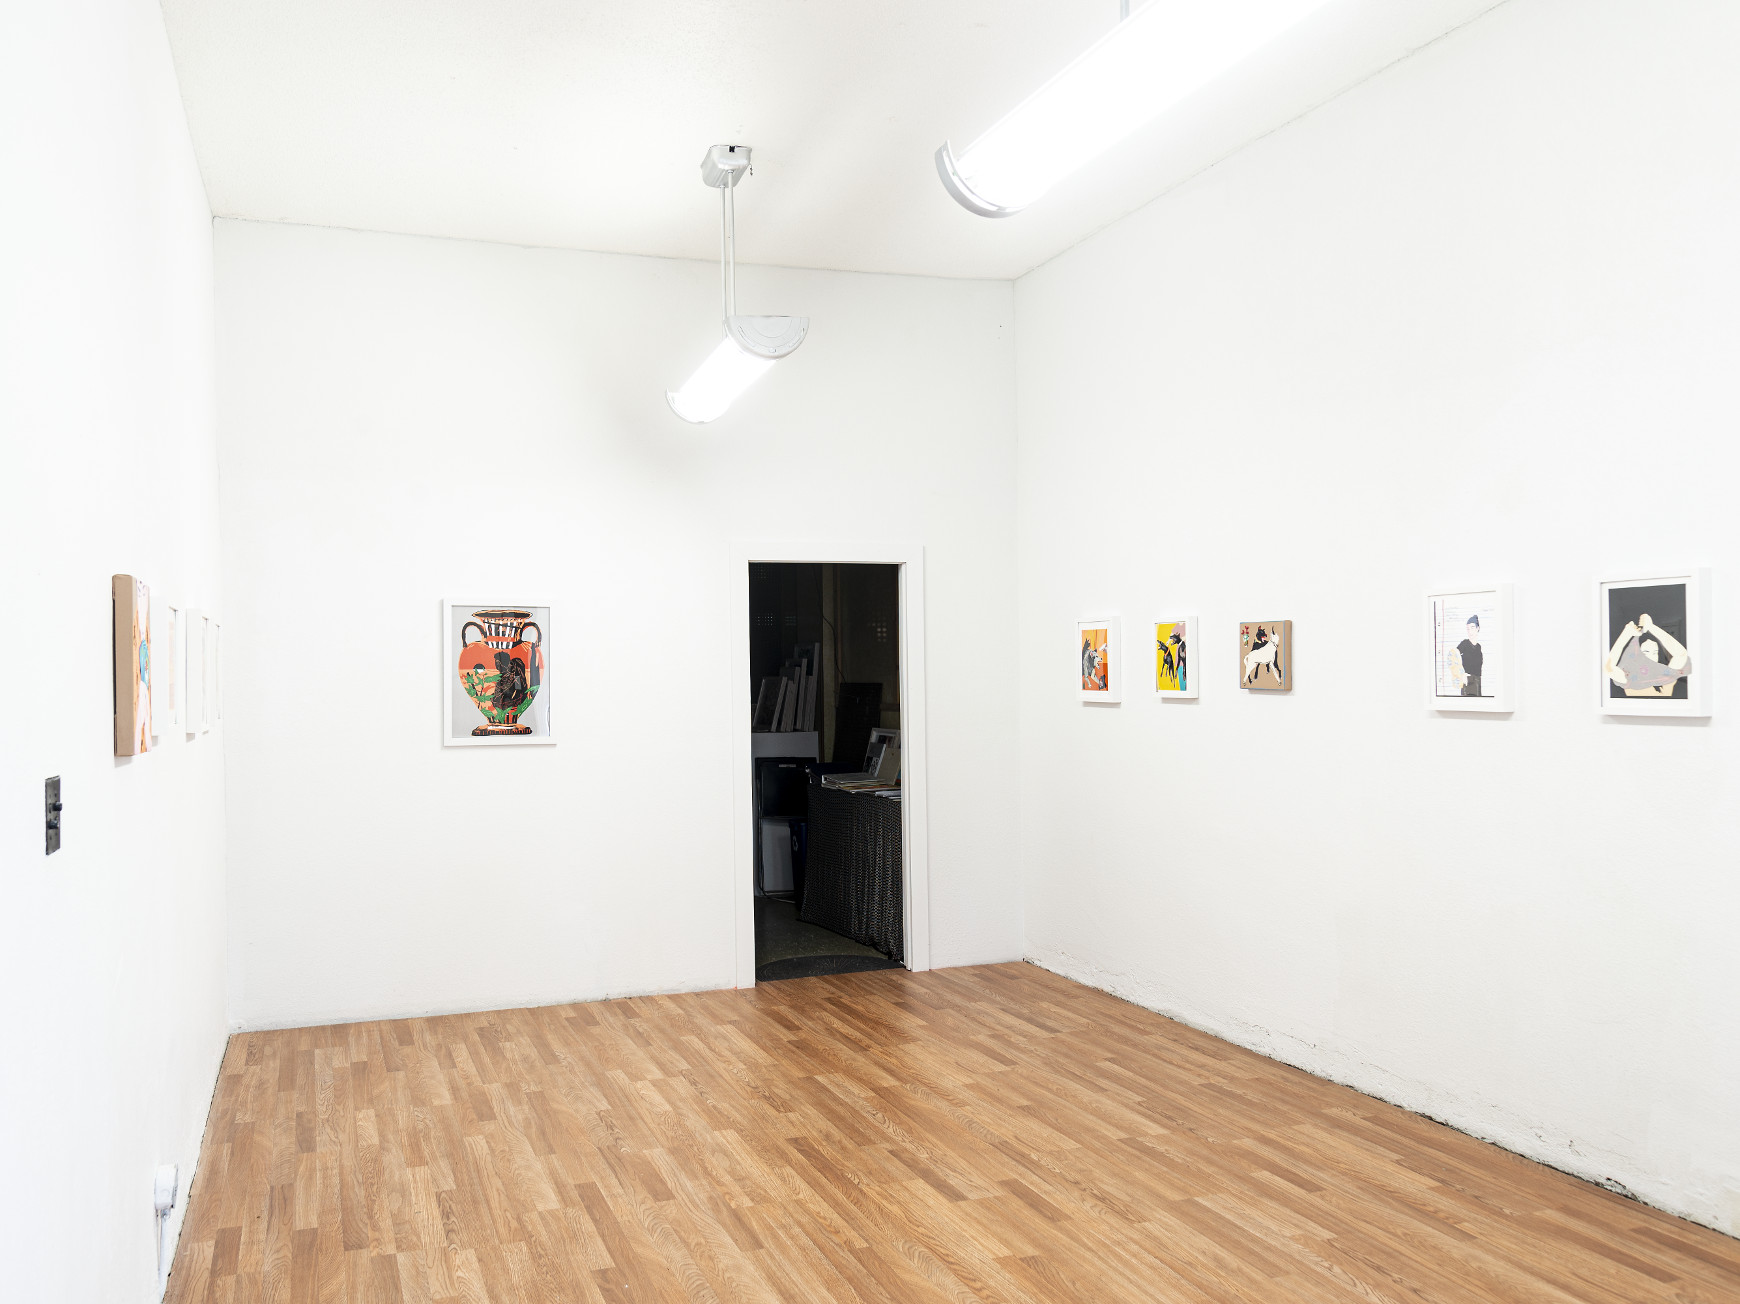 Indoor installation with white walls and wooden floor, small framed collages on the wall